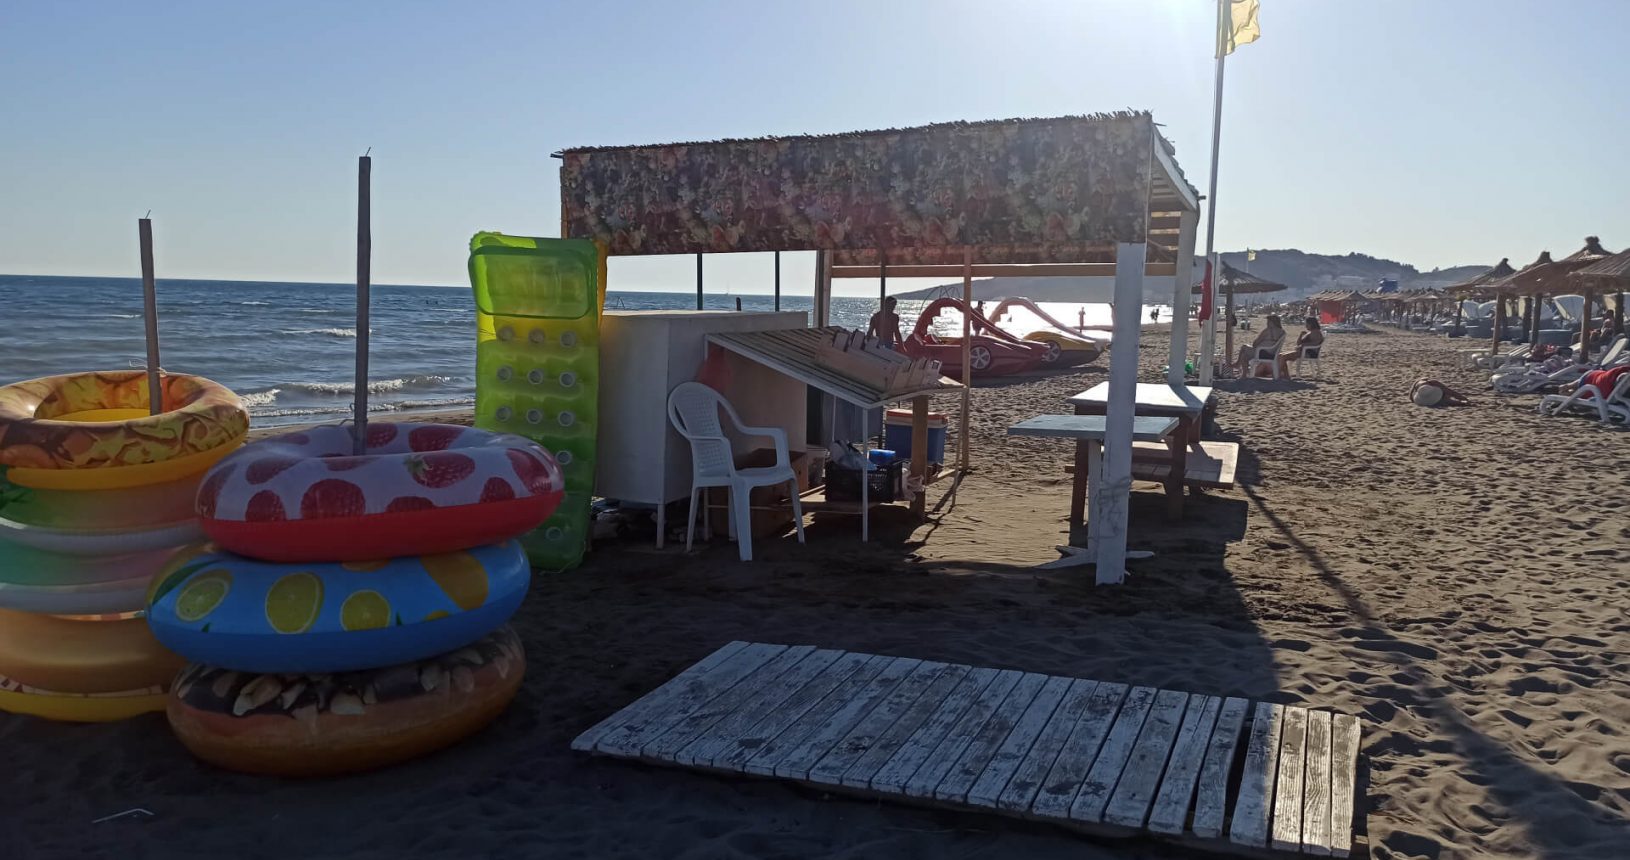 Europa Beach with renting stuff